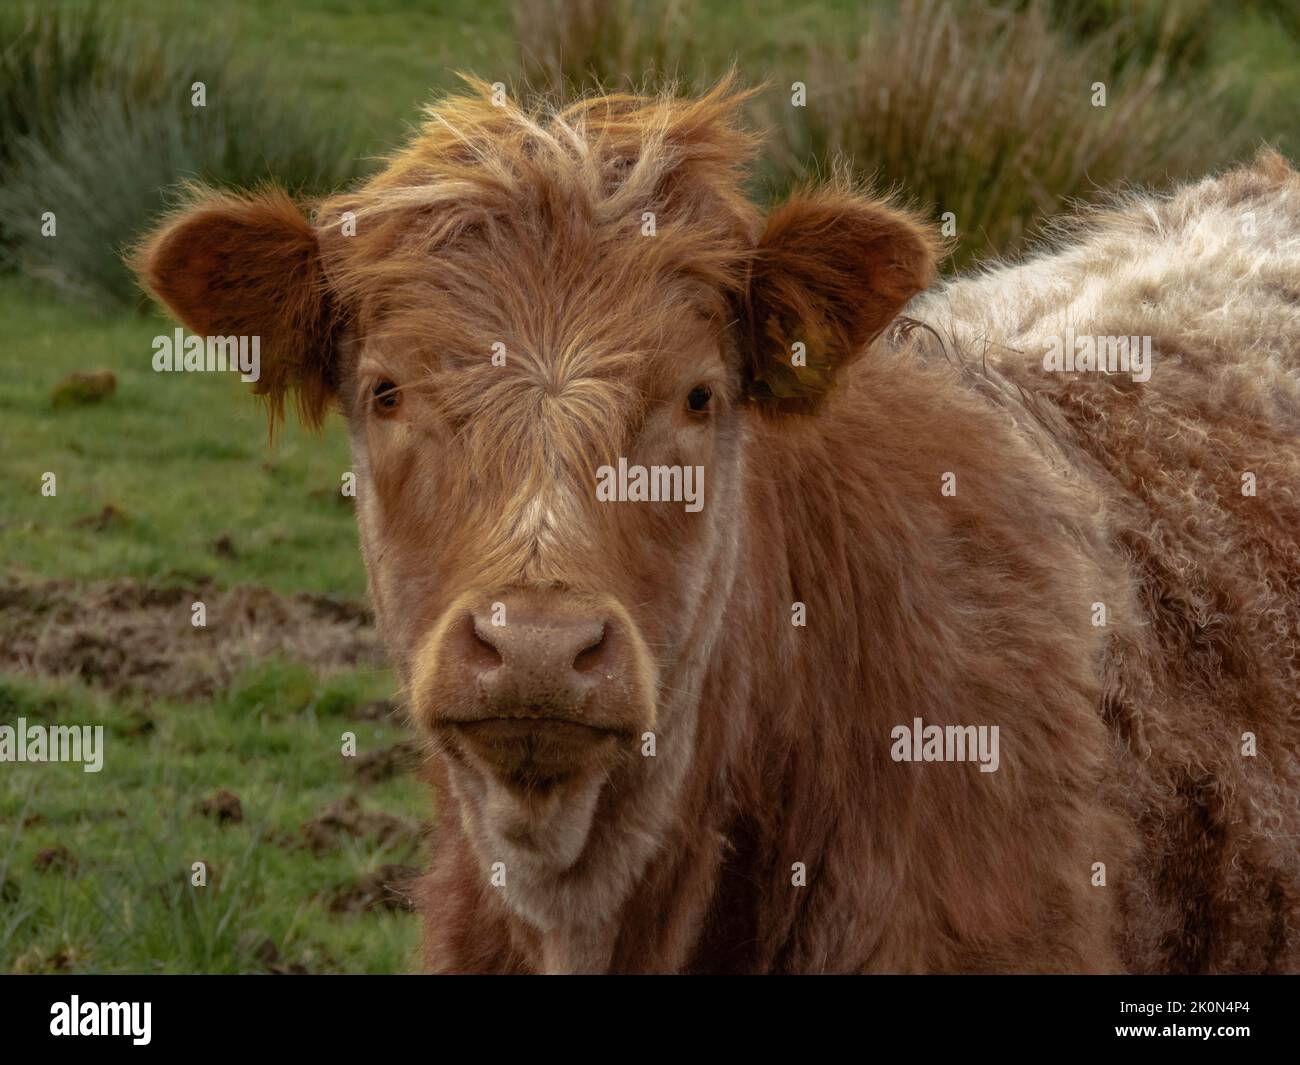 Highland cattle calf in a field looking at th camera with its head close up Stock Photo